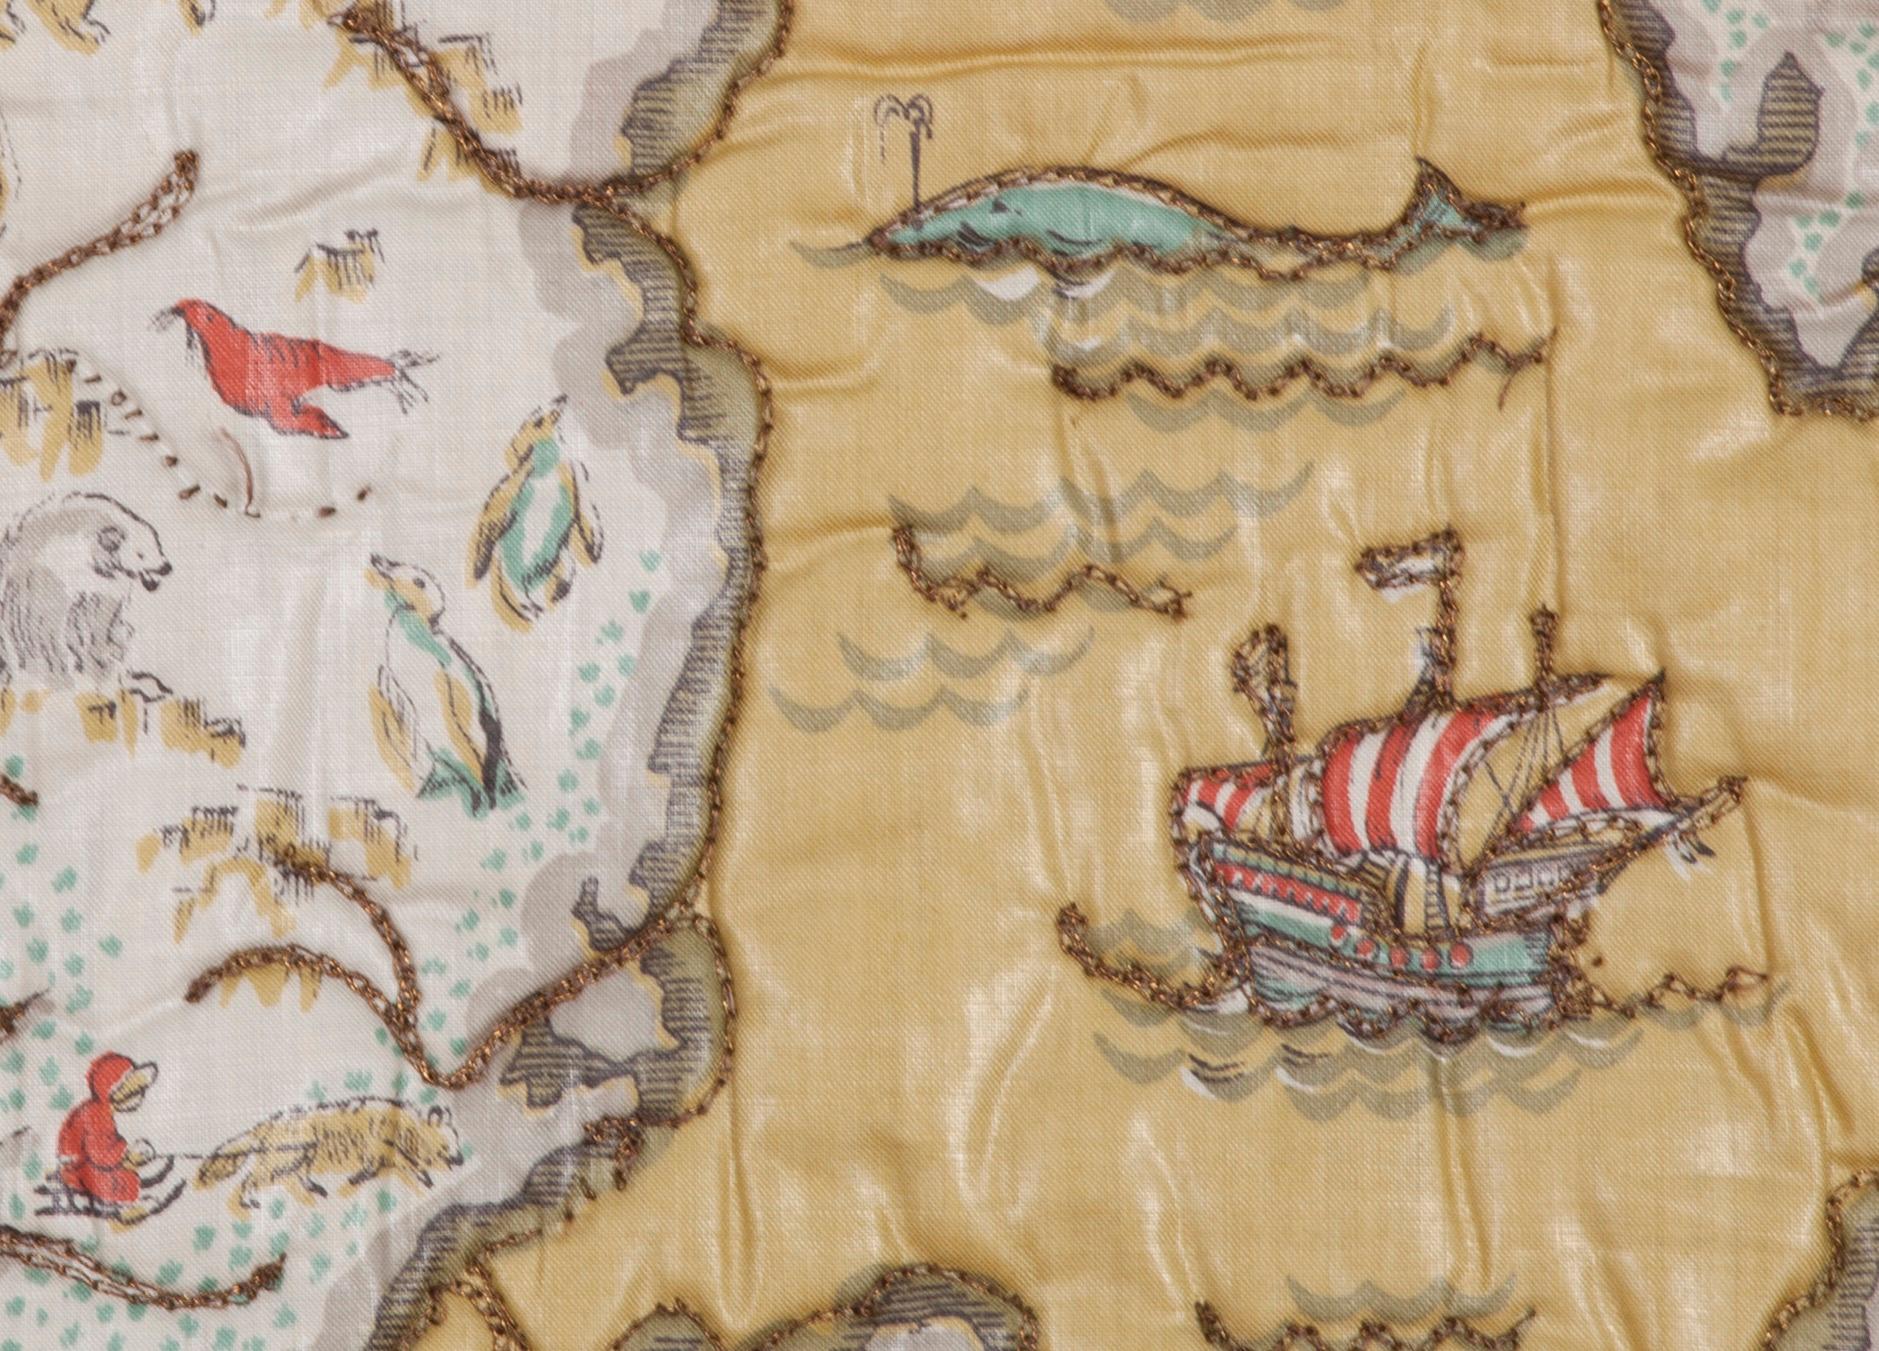 A very charming mid-20th century illustrated map printed on glazed cotton. Some outlines enlivened with couched metallic thread embroidery. The entire piece is edged with woven metallic ribbon (likely woven earlier, circa 19th century). This same